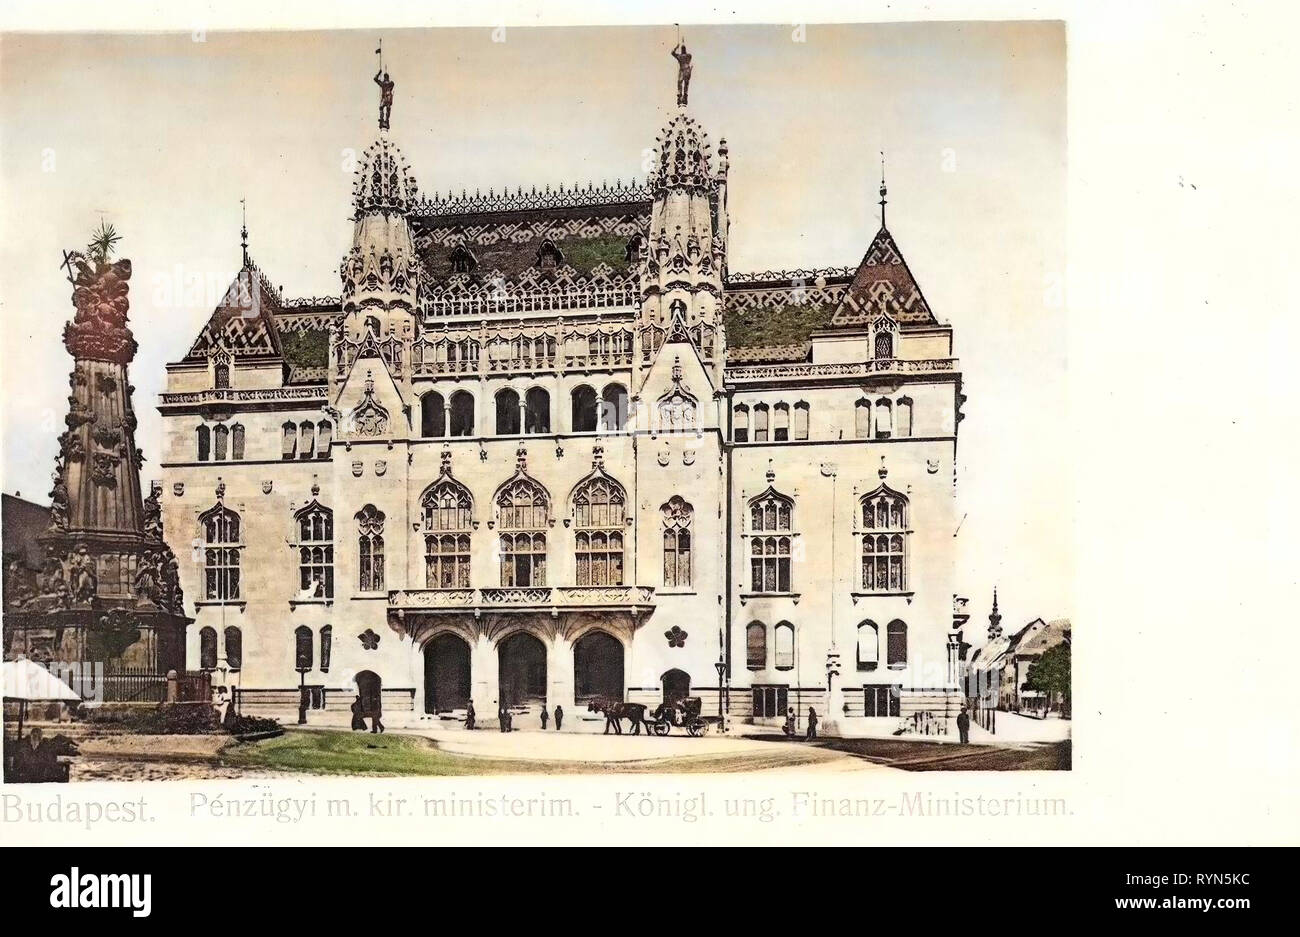 Building of the Hungarian Culture Foundation and the Holy Trinity column, 1904, Budapest, Königlich ungarisches Finanzministerium, Hungary Stock Photo